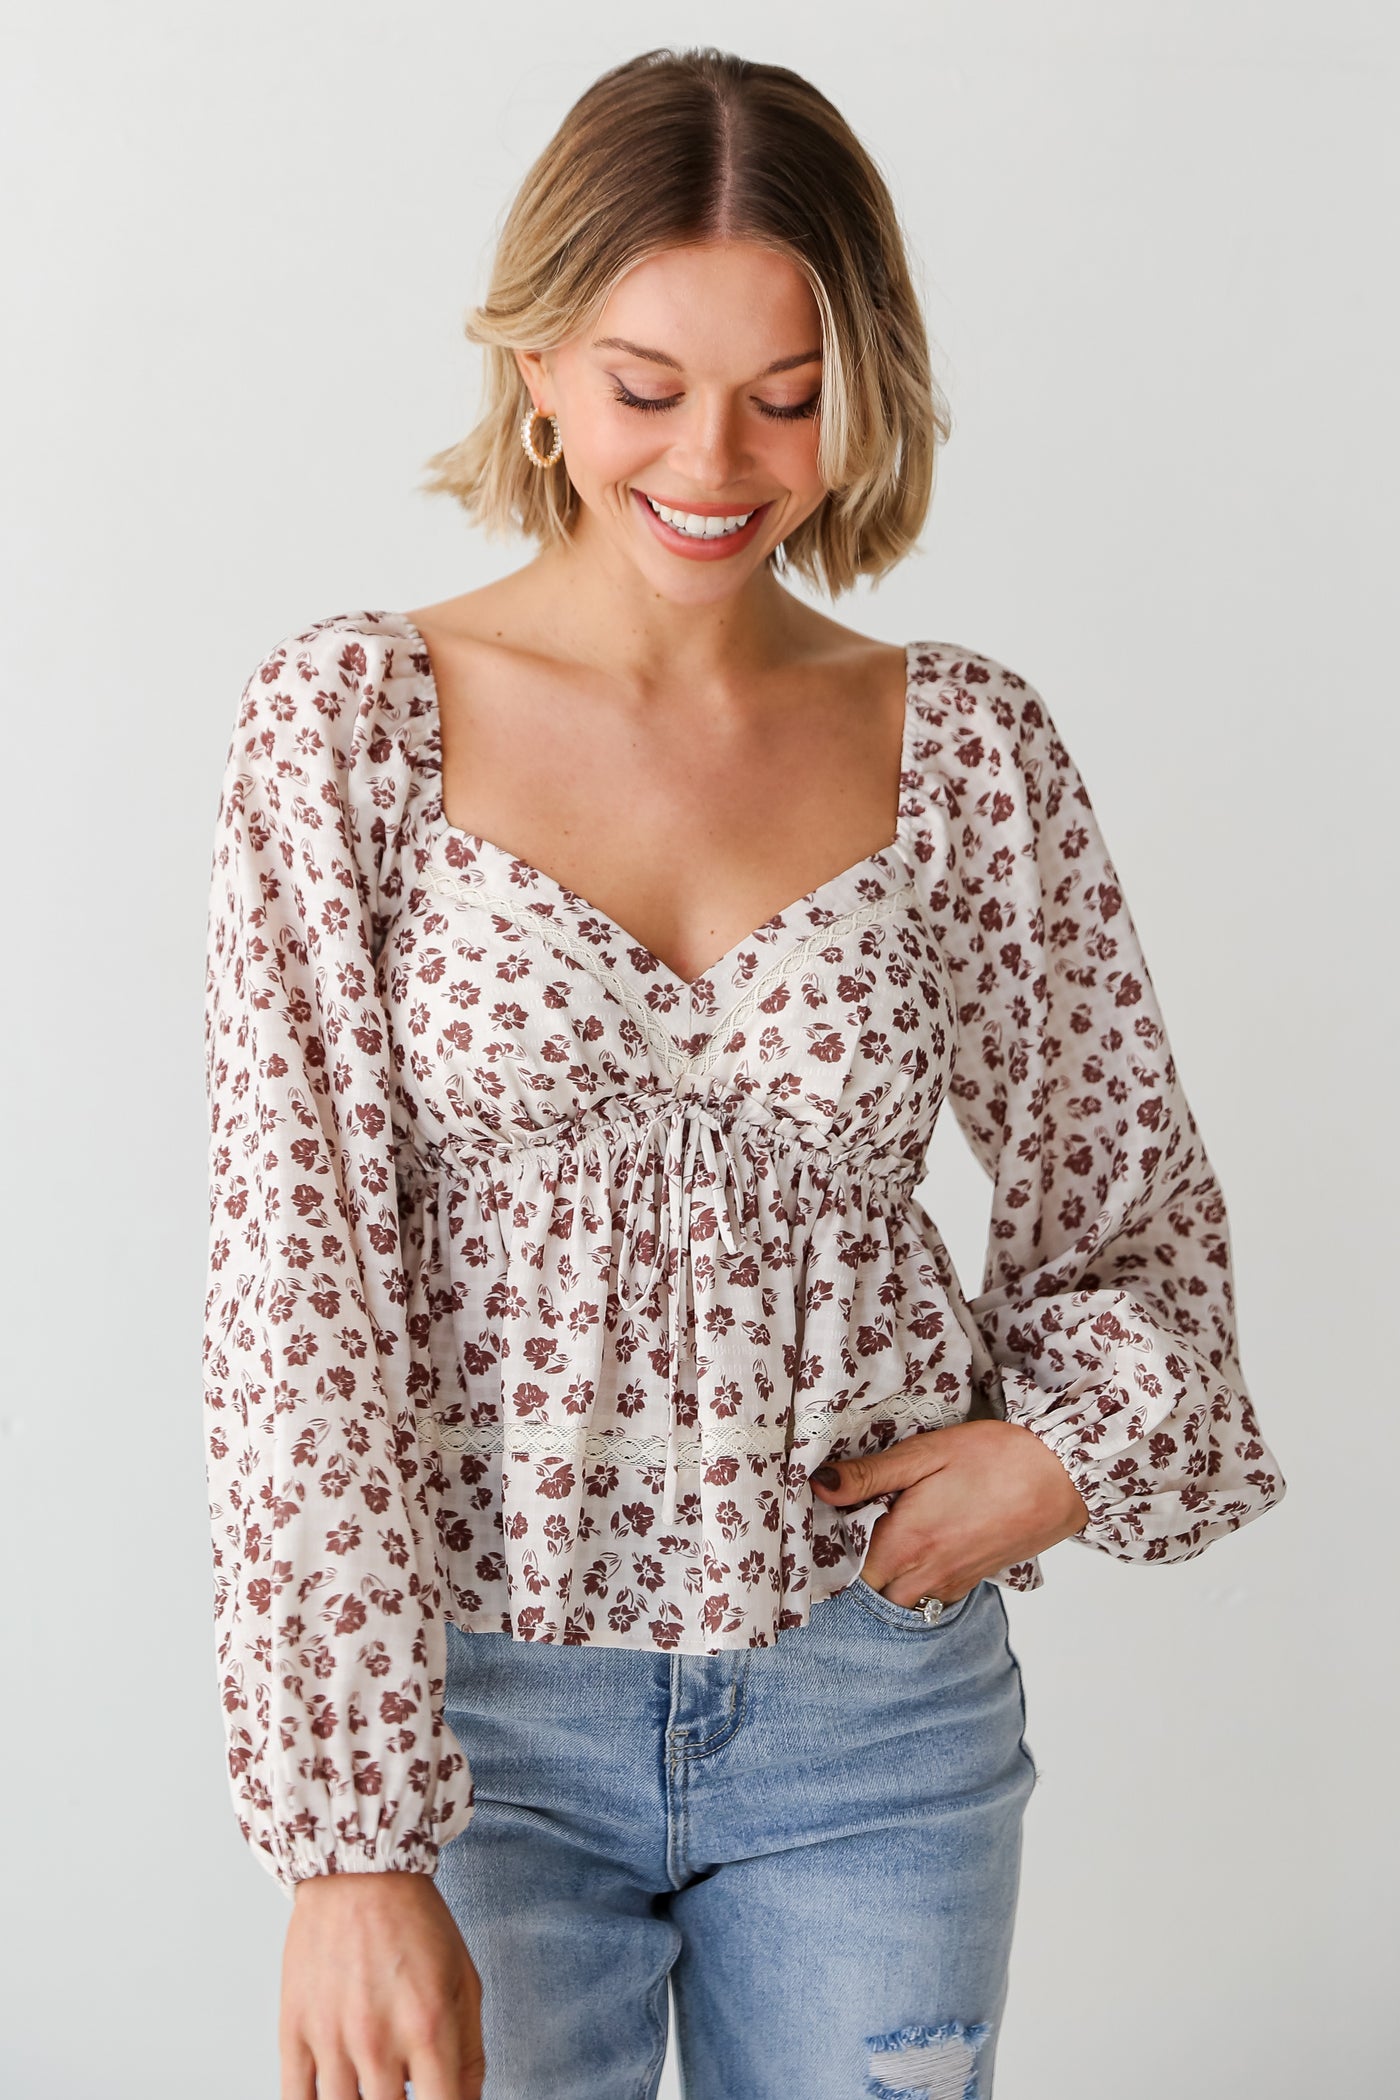 floral tops for women